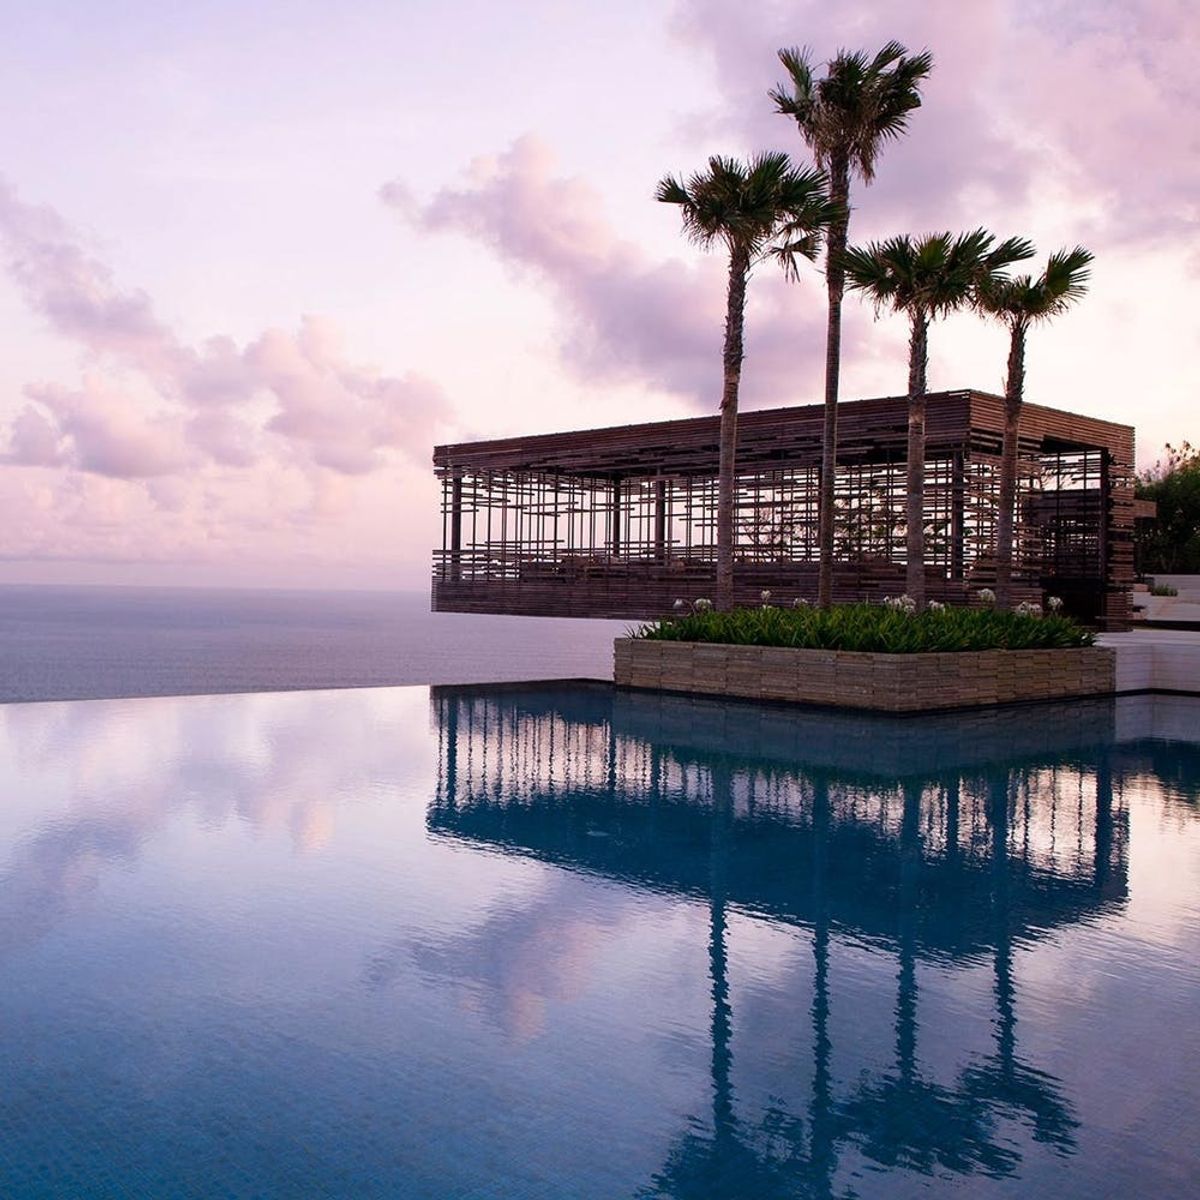 The 50 Most Beautiful Swimming Pools in the World